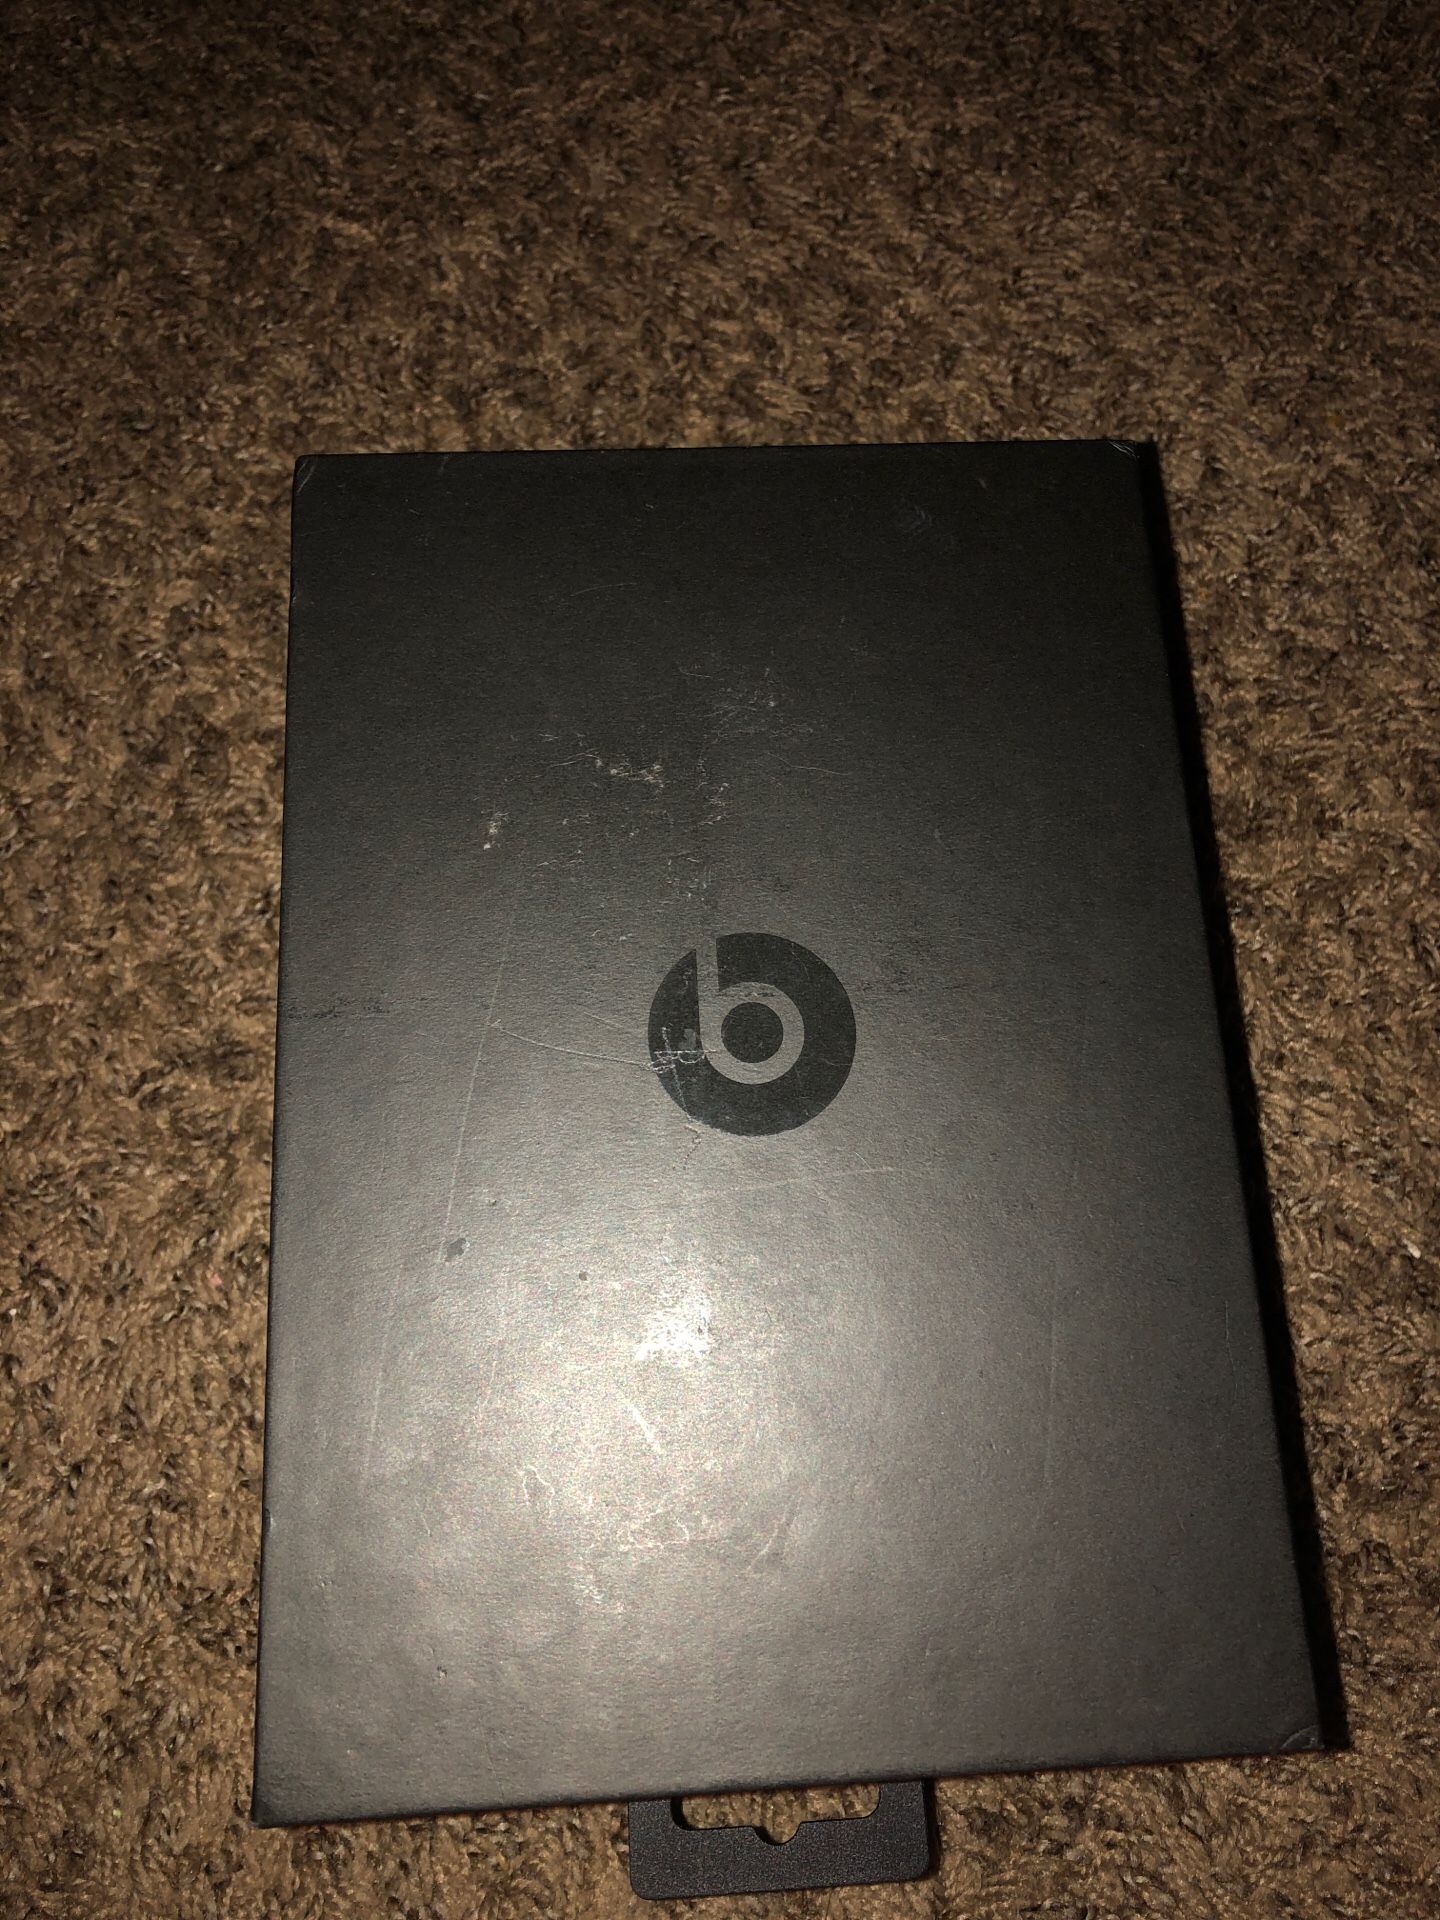 Beats solo 2 wired ( no Bluetooth )